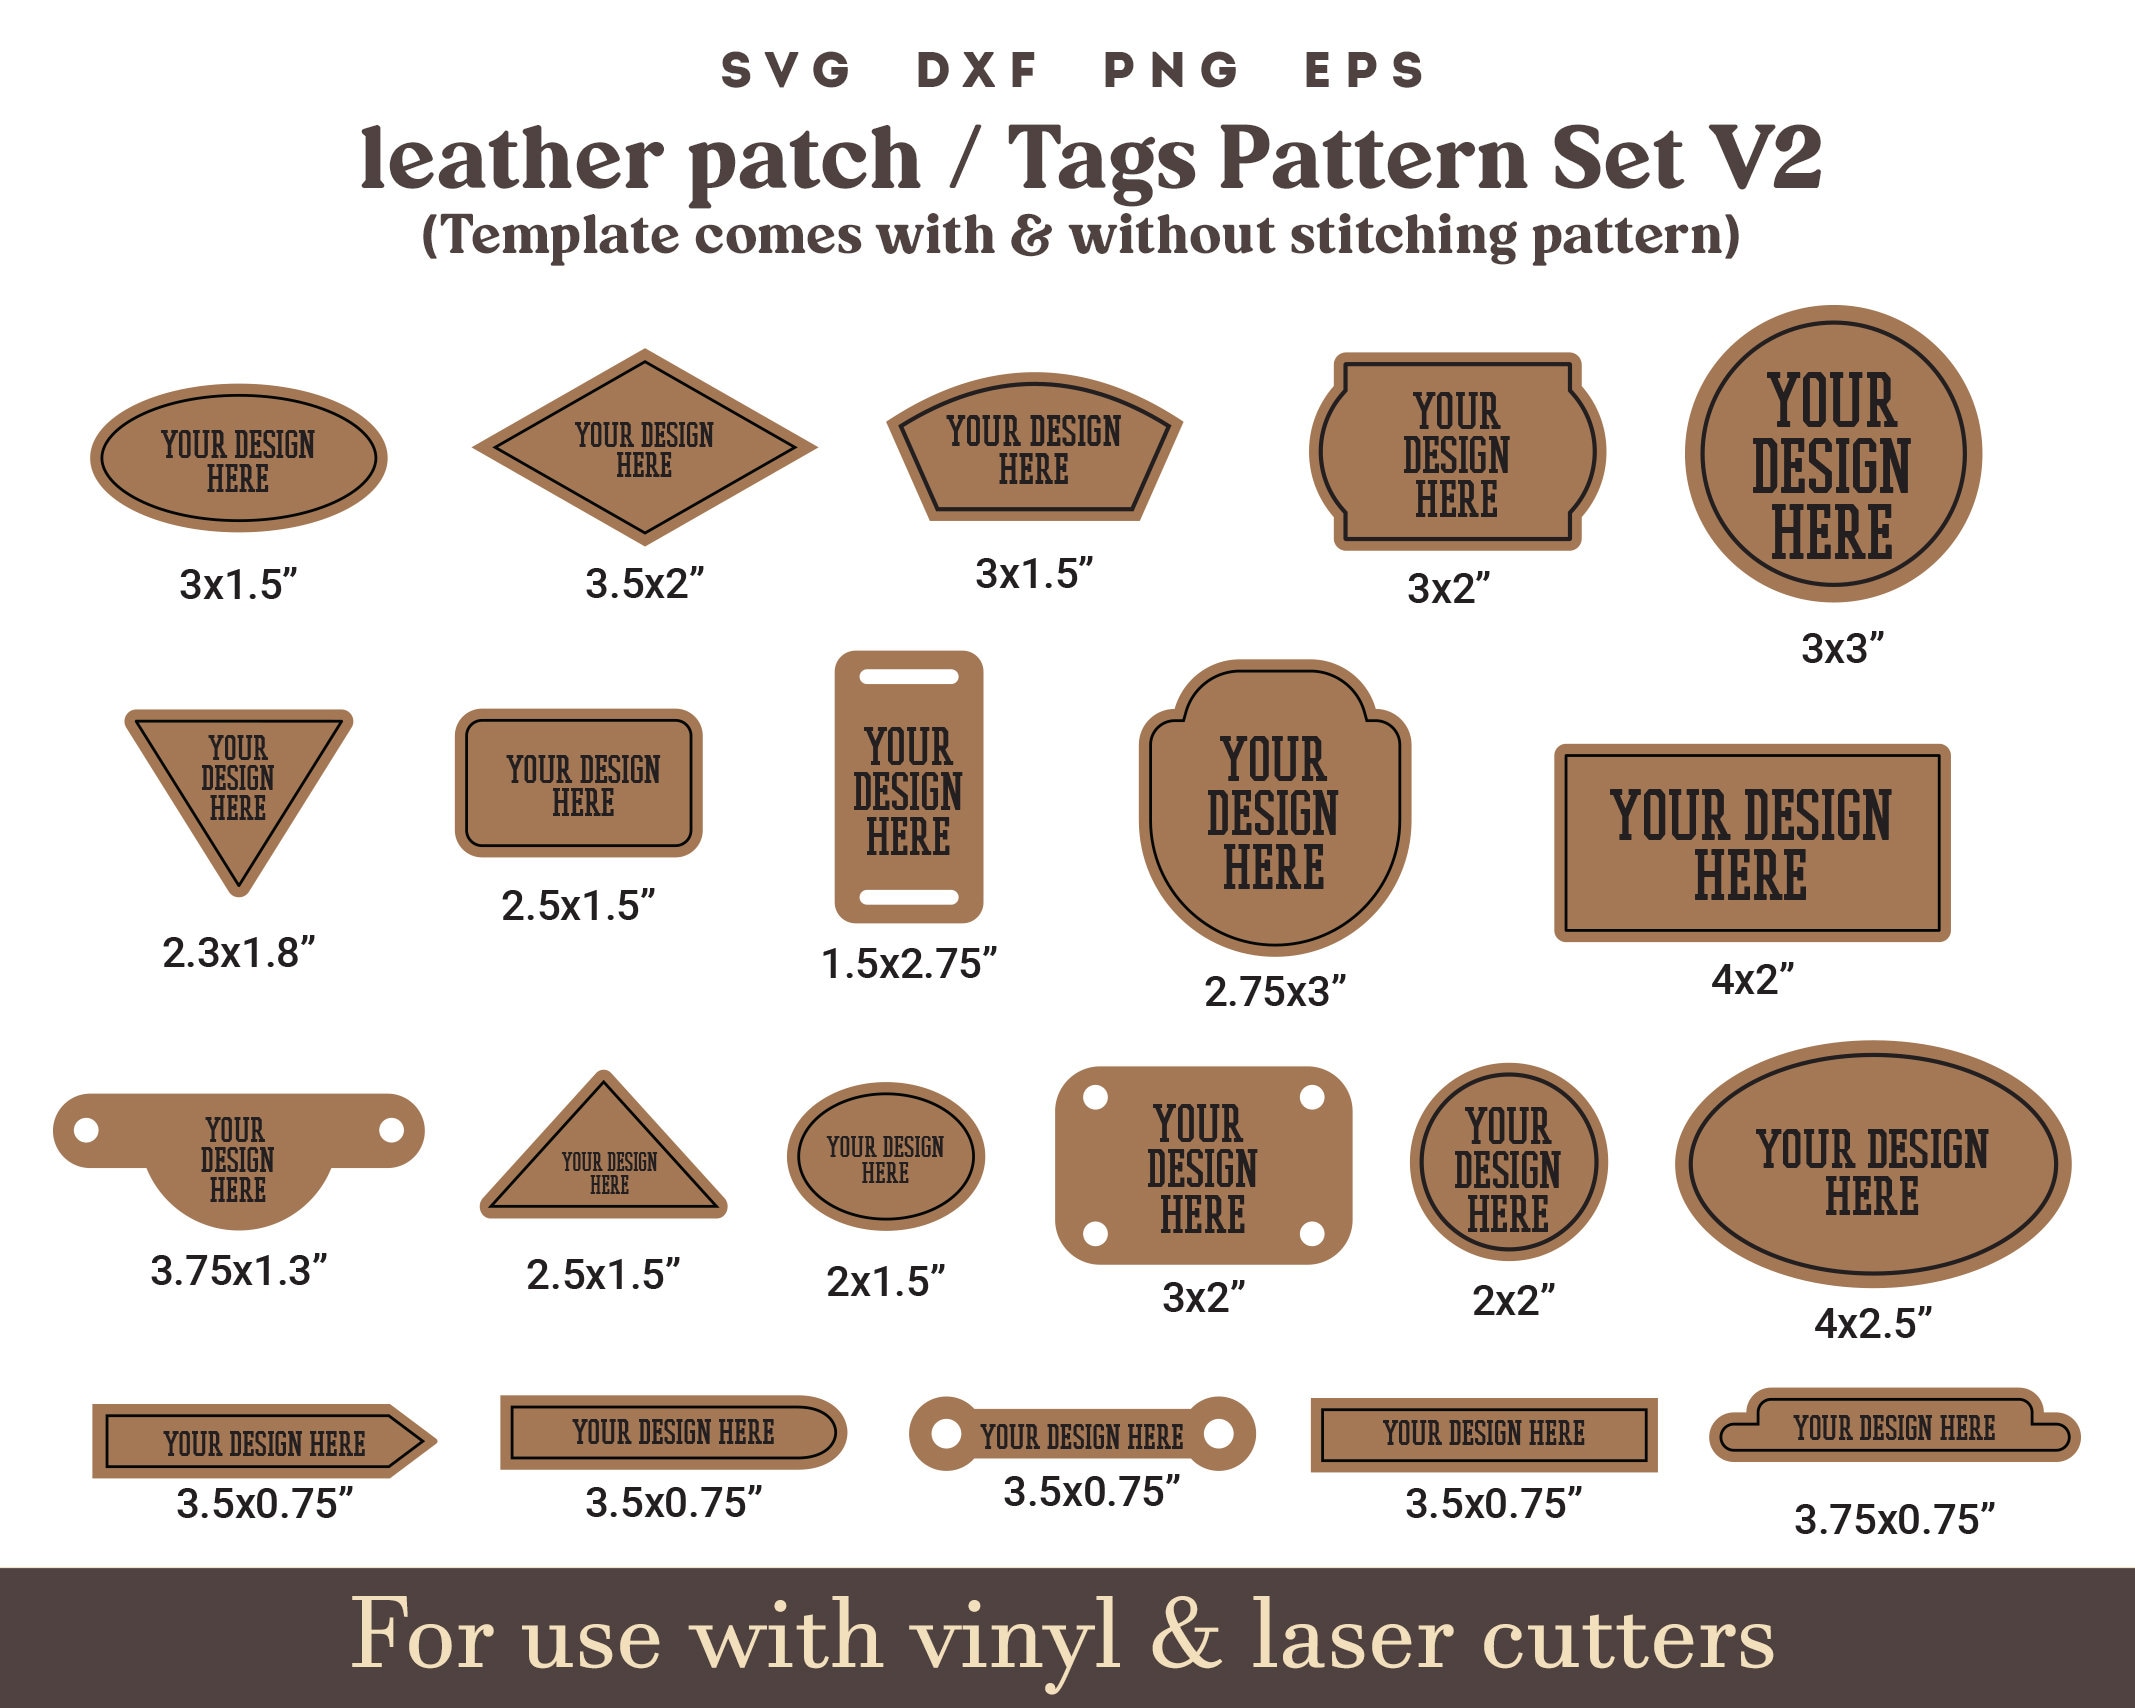 Sealing a leather patch - Everything Else - Glowforge Owners Forum